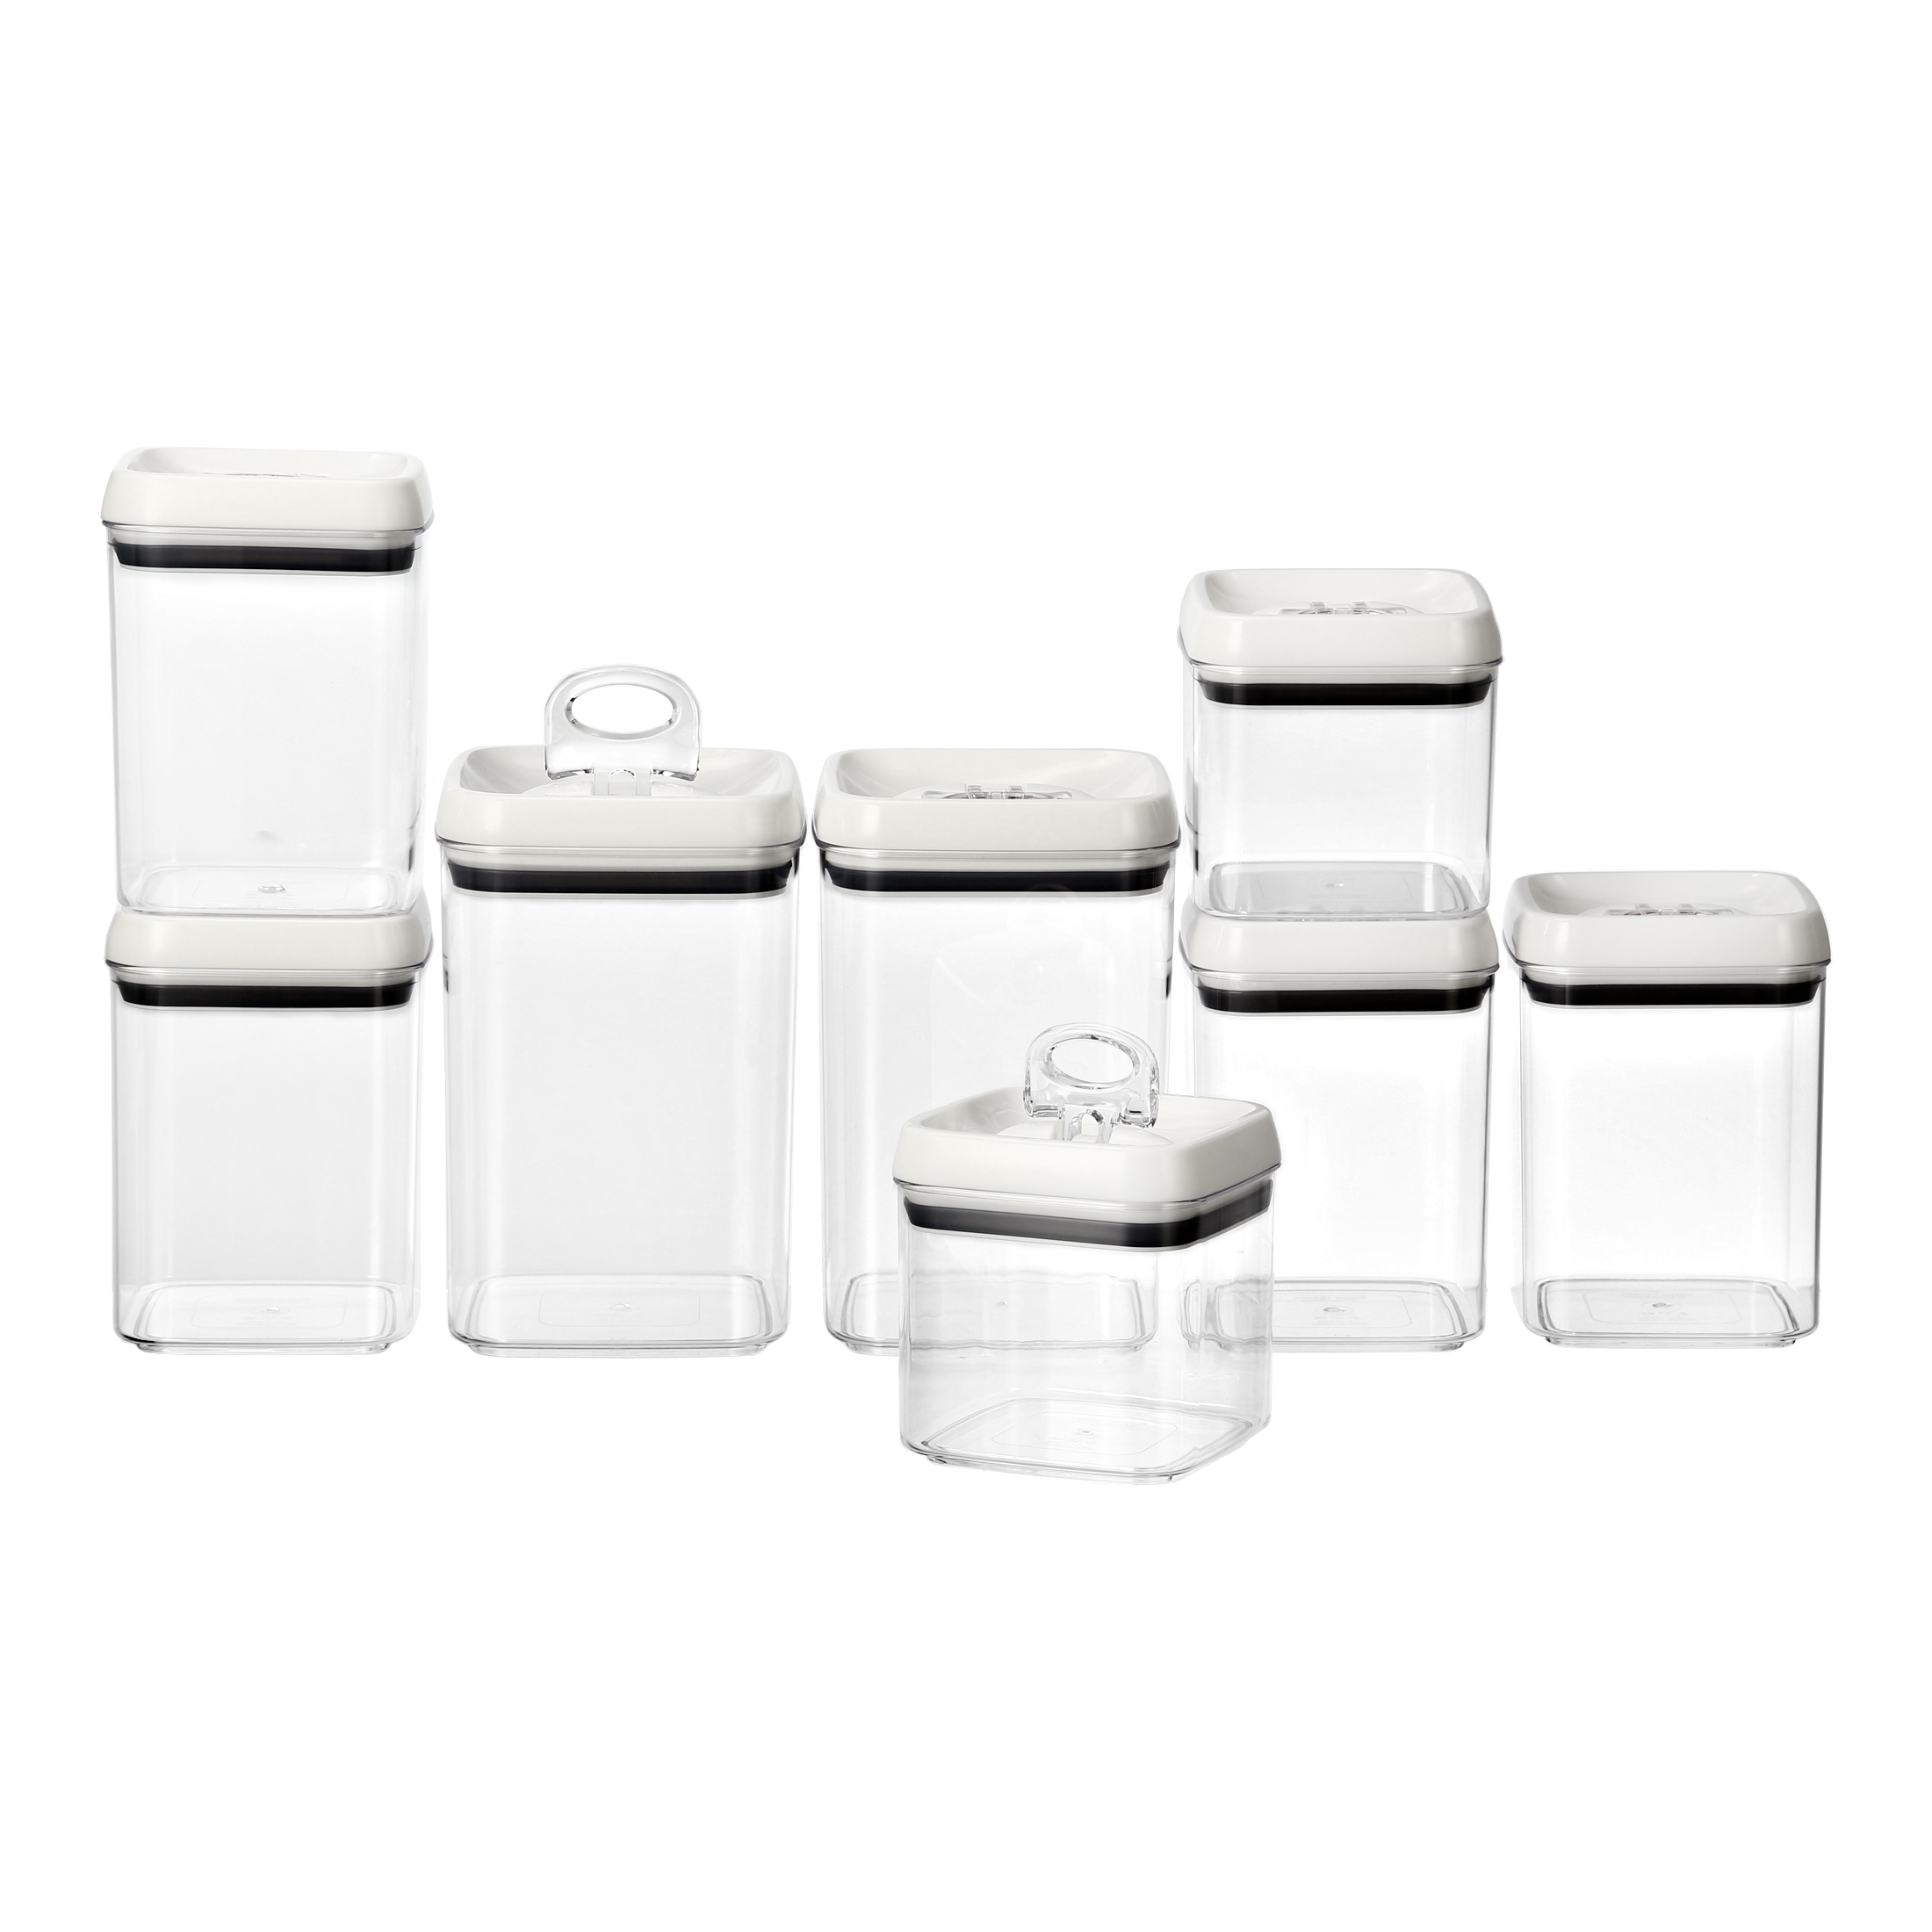 Better Homes & Gardens Canister Pack of 8 - Flip Tite Food Storage Container Set - image 1 of 6